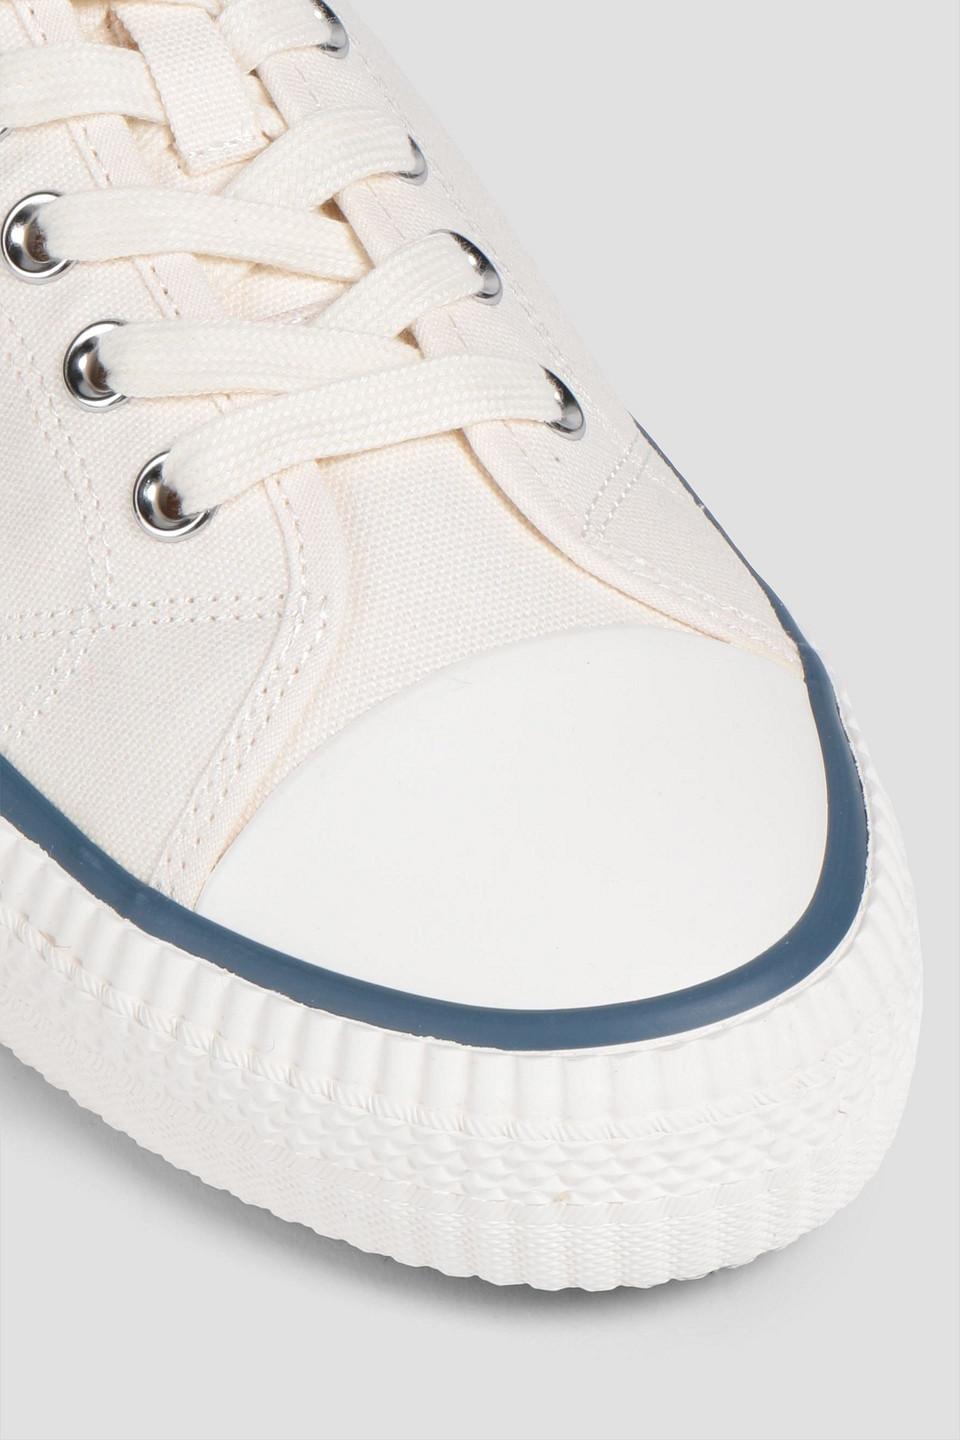 Paul Smith Kolby Canvas Sneakers in White for Men | Lyst